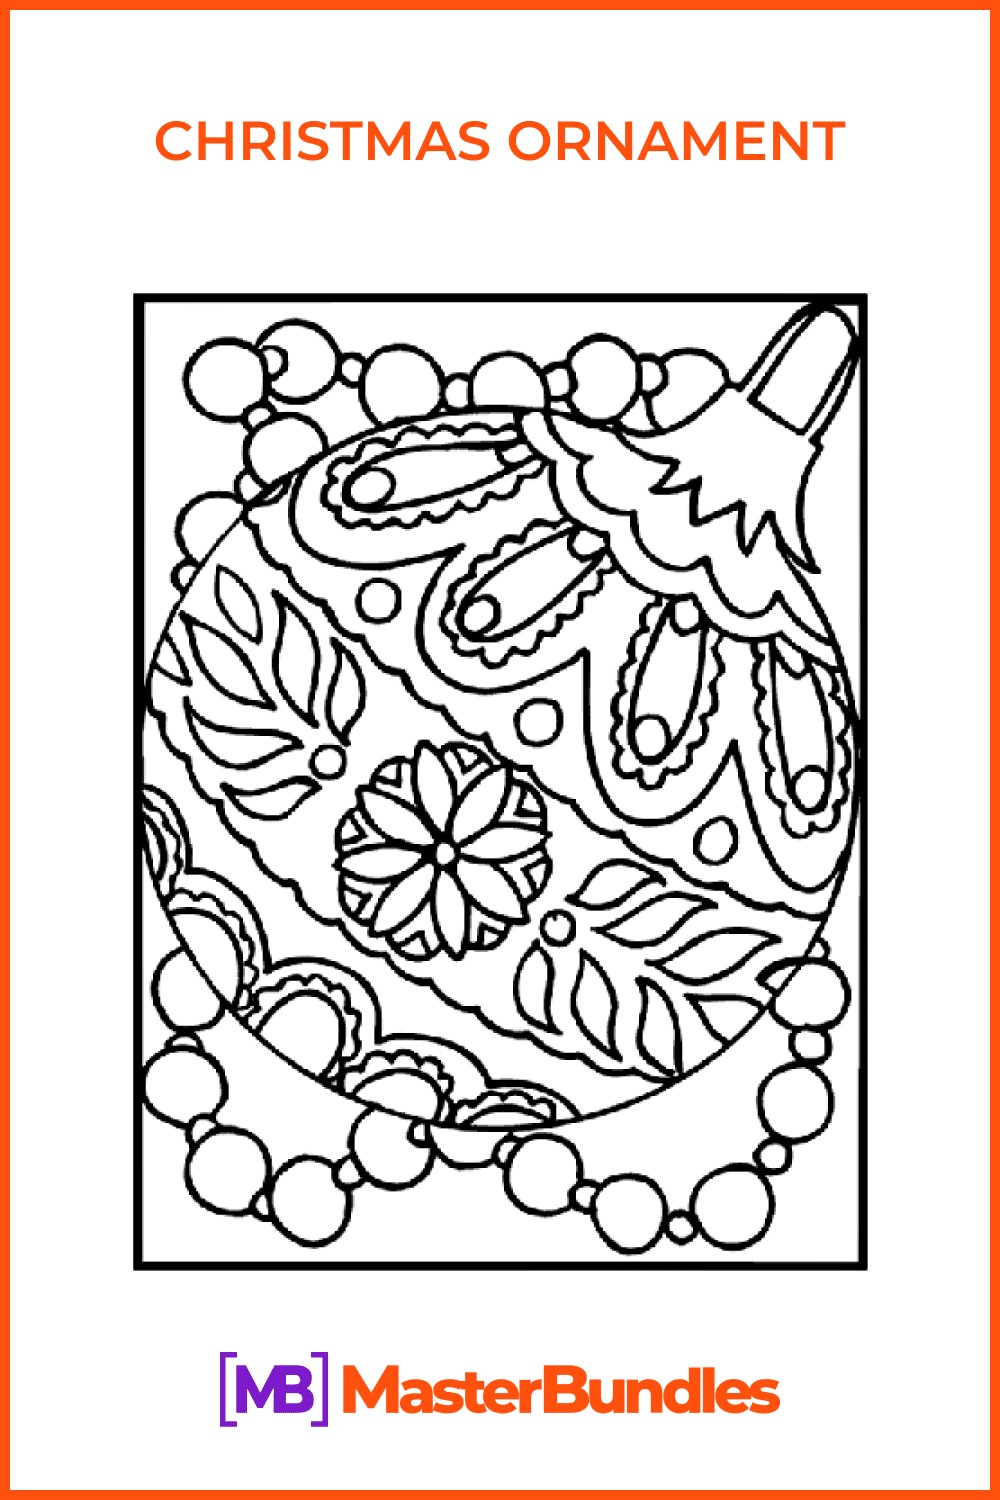 Christmas ornament coloring page pinterest image.